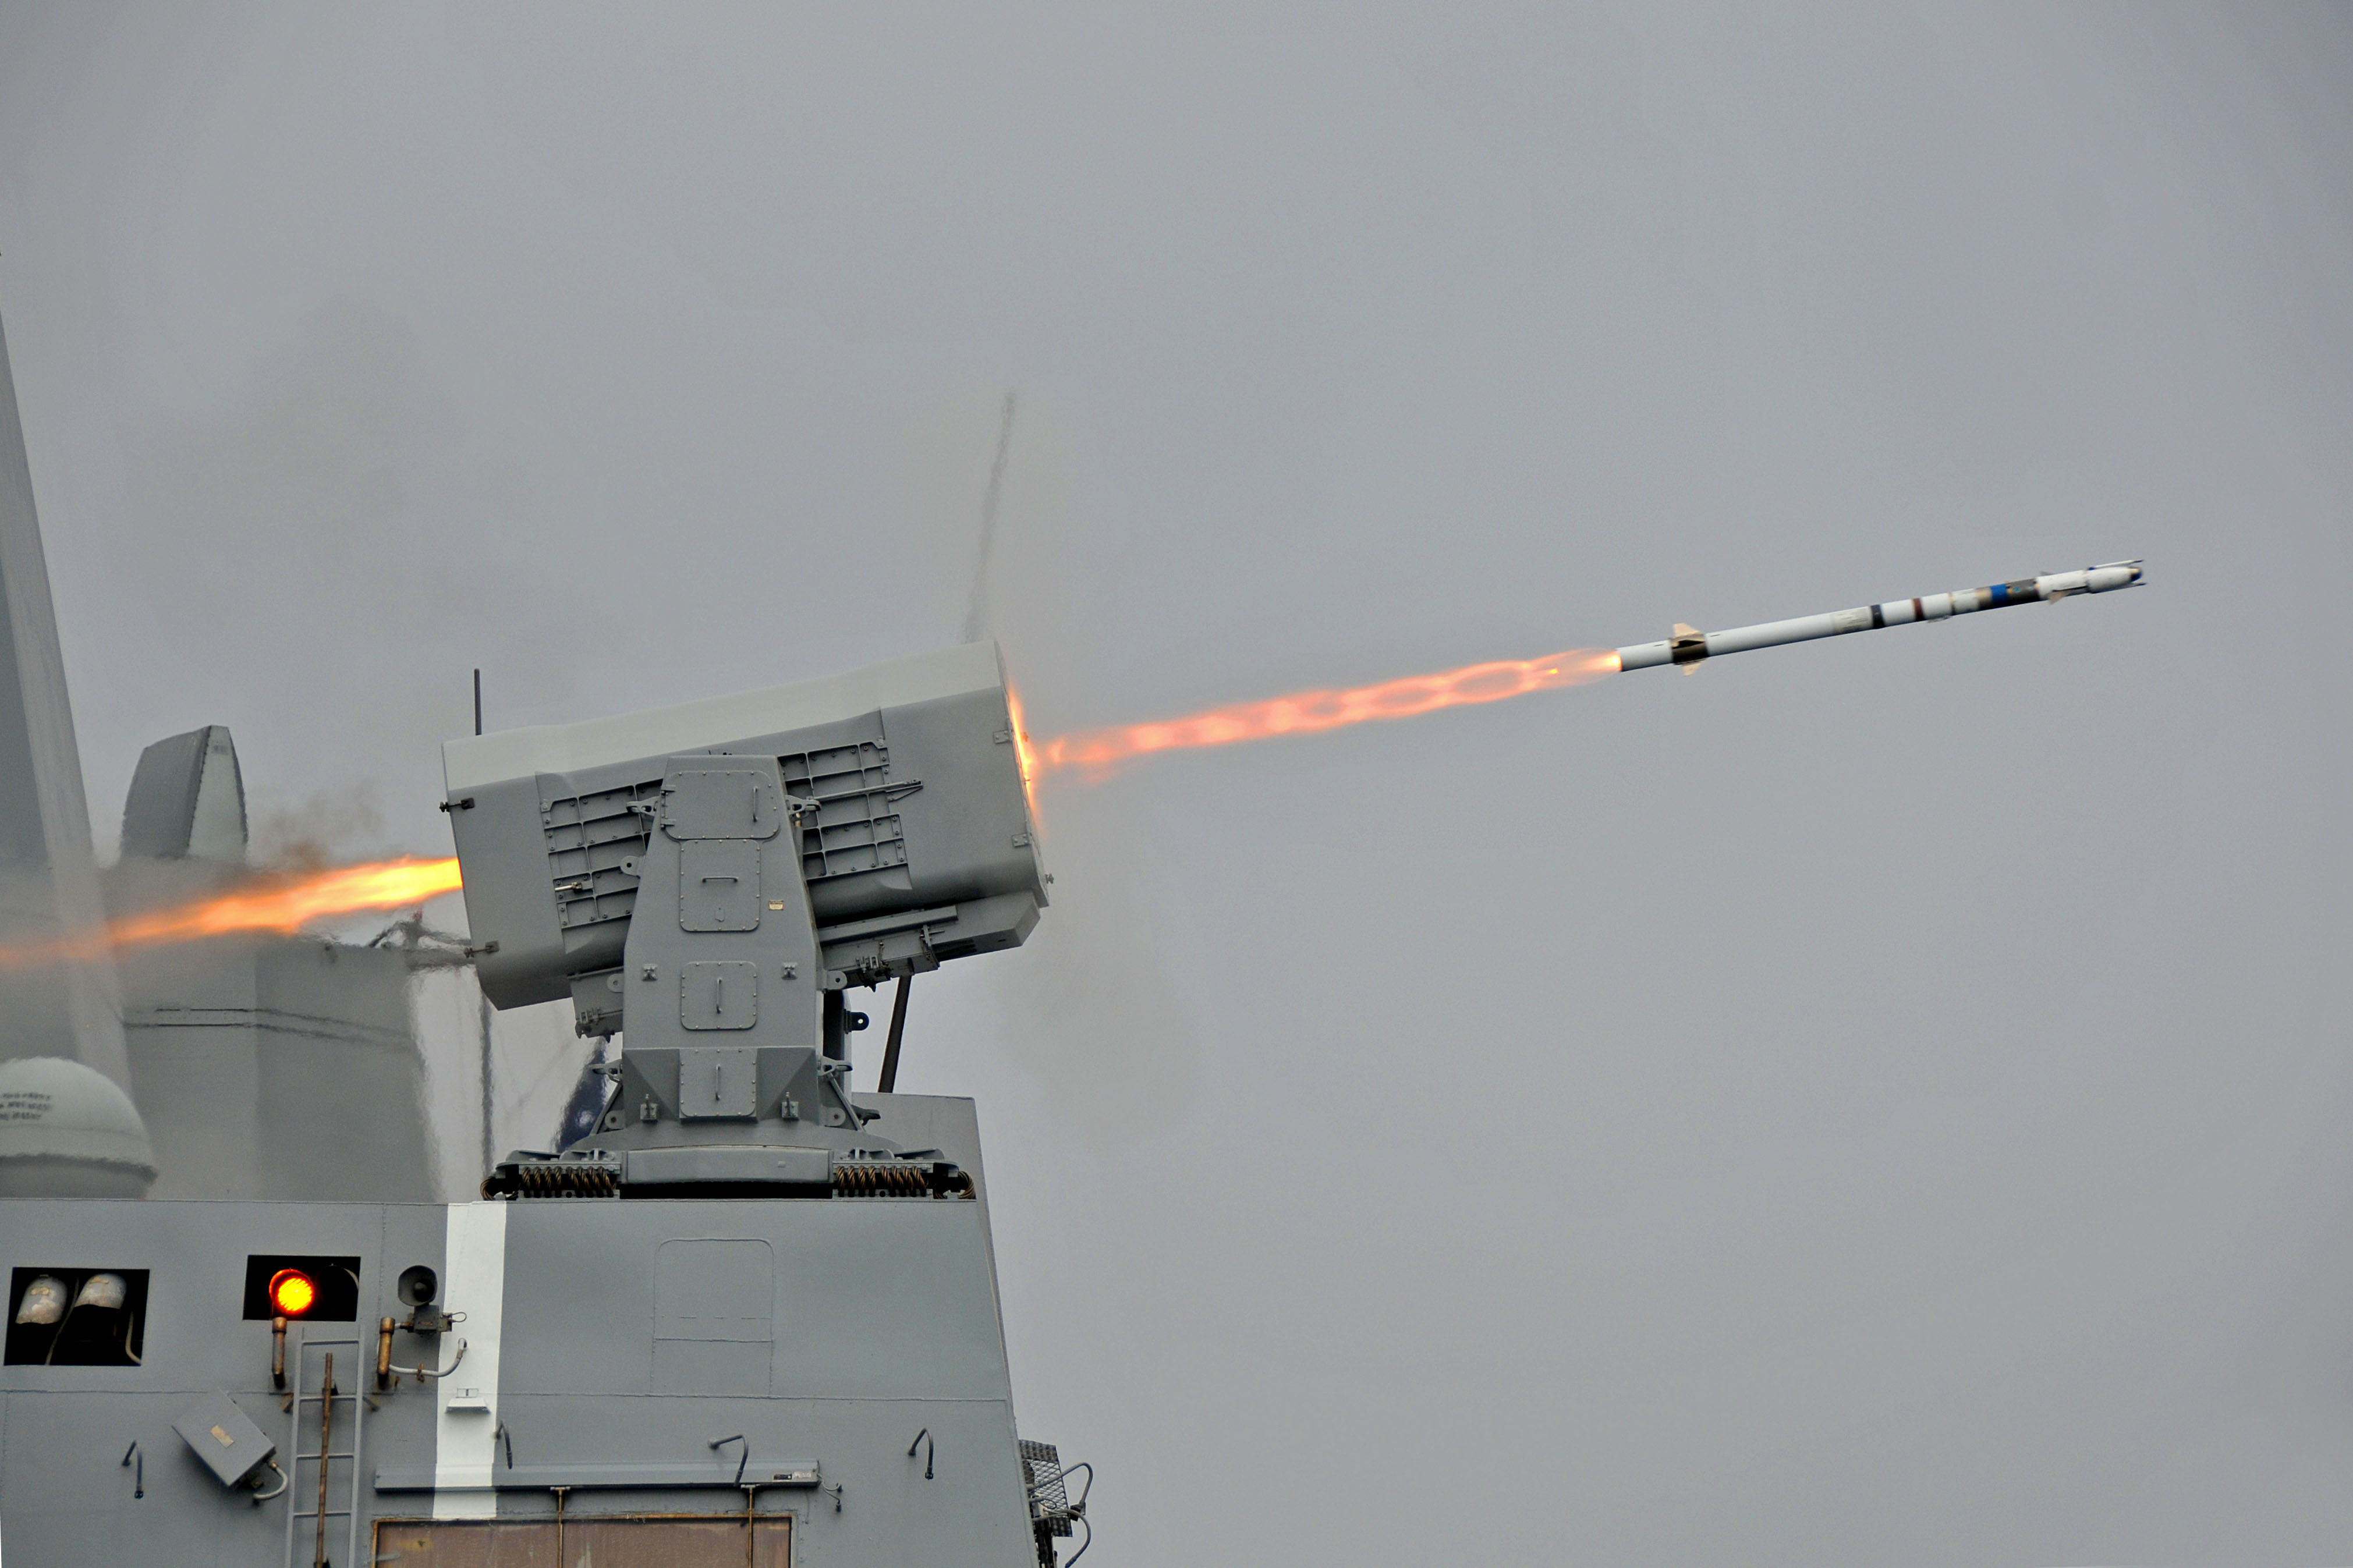 USS_New_Orleans_%28LPD-18%29_launches_RIM-116_missile_2013.jpg